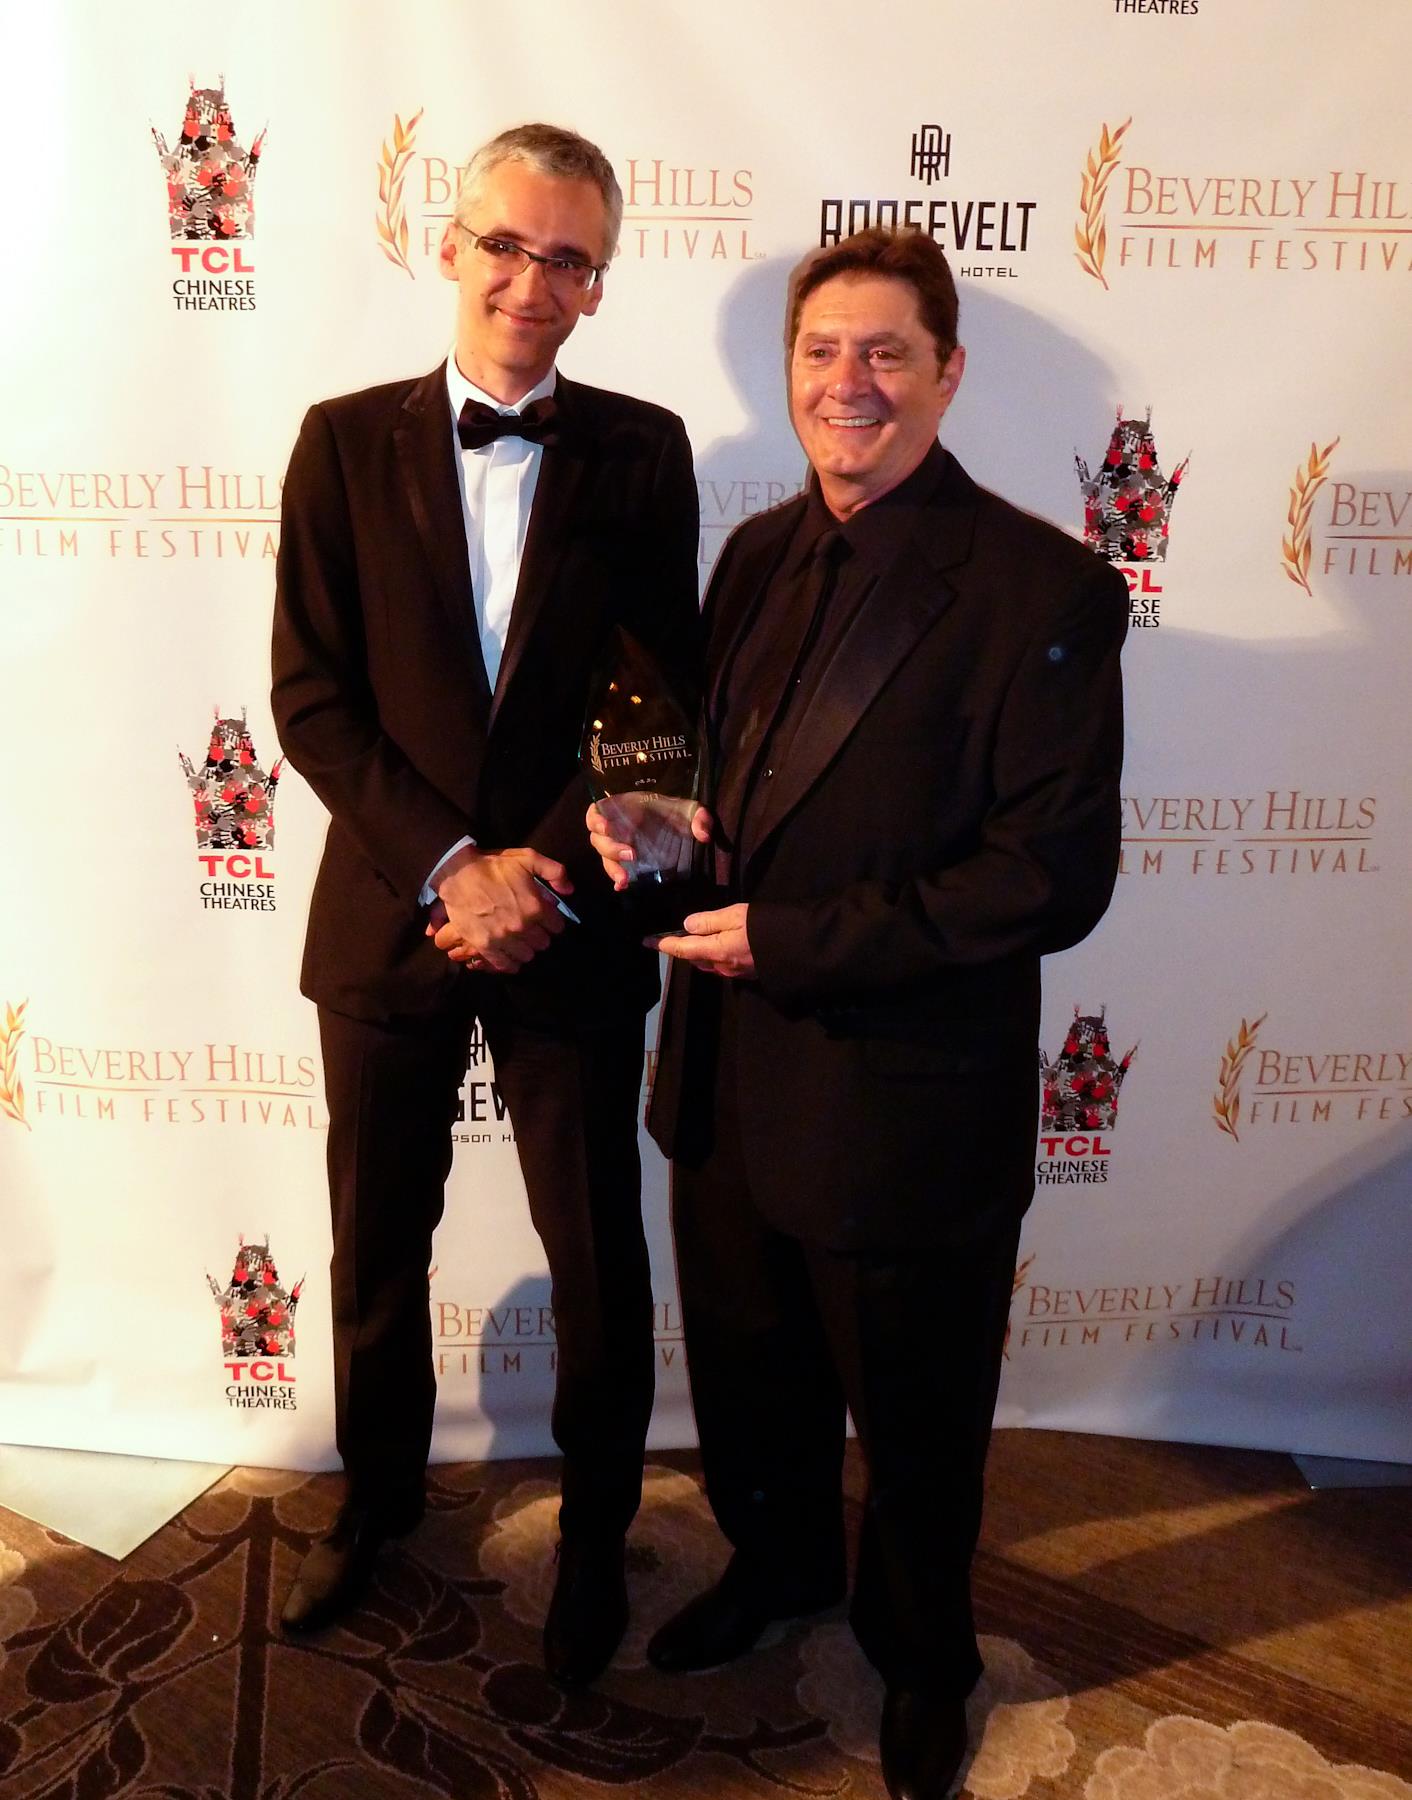 Receiving an award for the documentary 